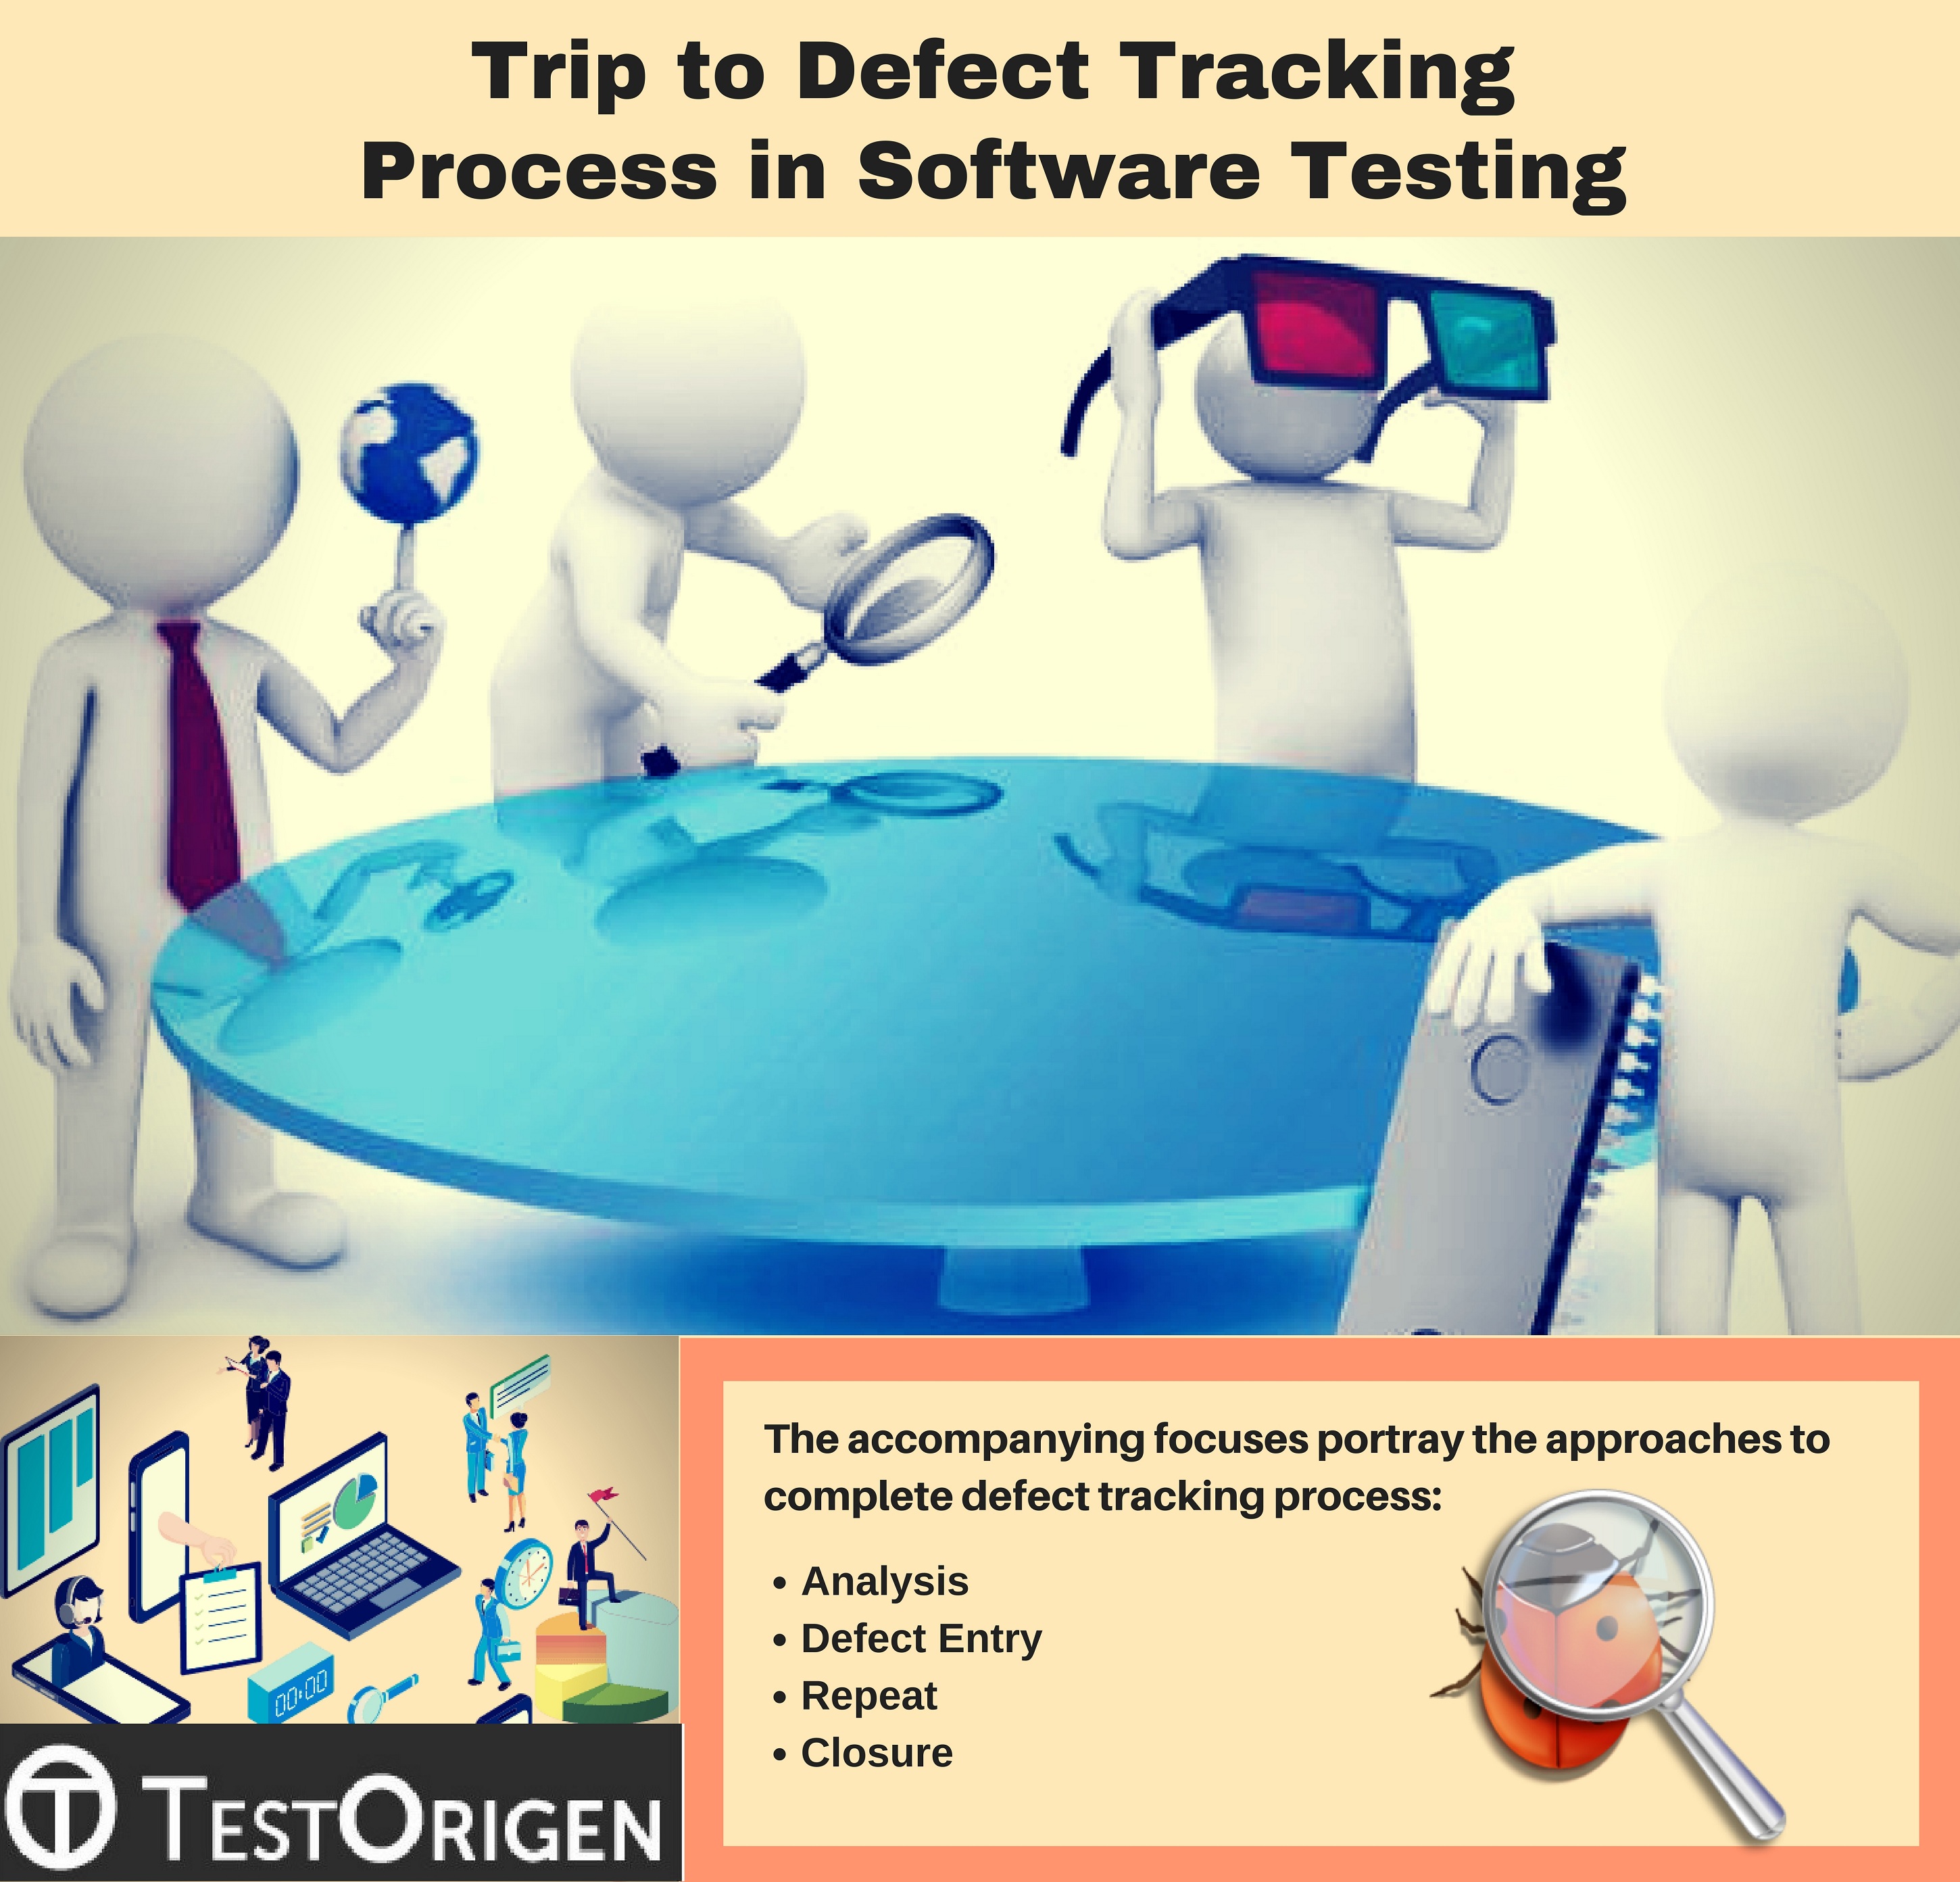 Trip to Defect Tracking Process in Software Testing